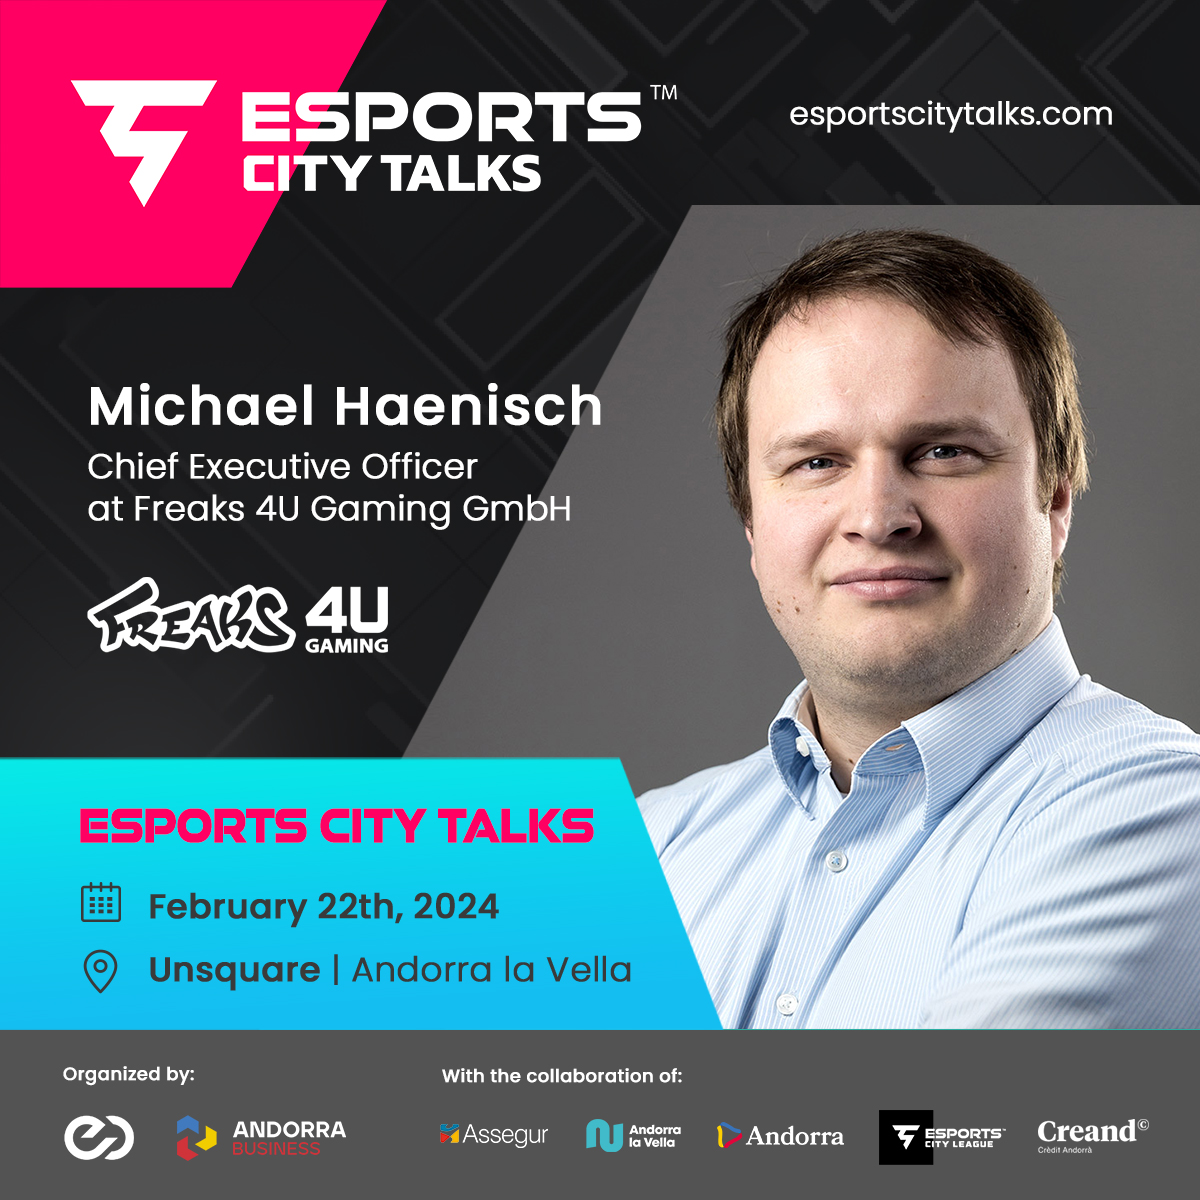 📢Join our CEO Michael Haenisch at Esports City Talks in Andorra this Thursday! He will share insights from over two decades of experiences on the panel of “Pioneers and Innovators: Bridging Decades in Esports.” Come on by if you are around! 👋 @AndorraBusiness #Encom